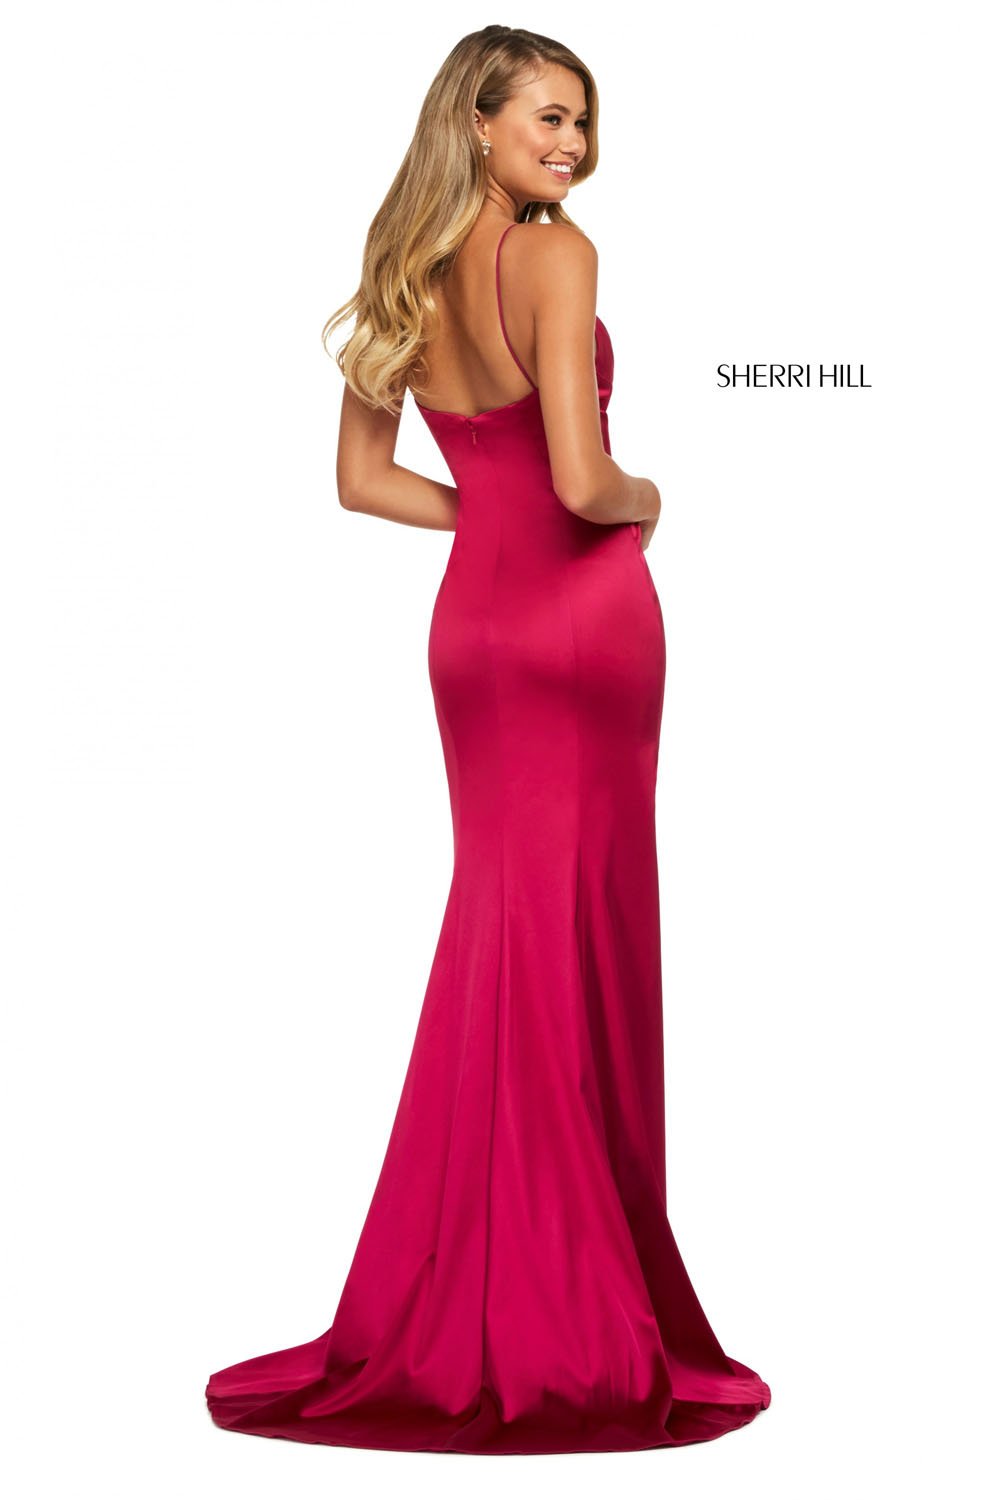 Sherri Hill 53389 dress images in these colors: Emerald, Blush, Ruby, Red, Black, Navy, Berry, Teal, Royal, Rose.